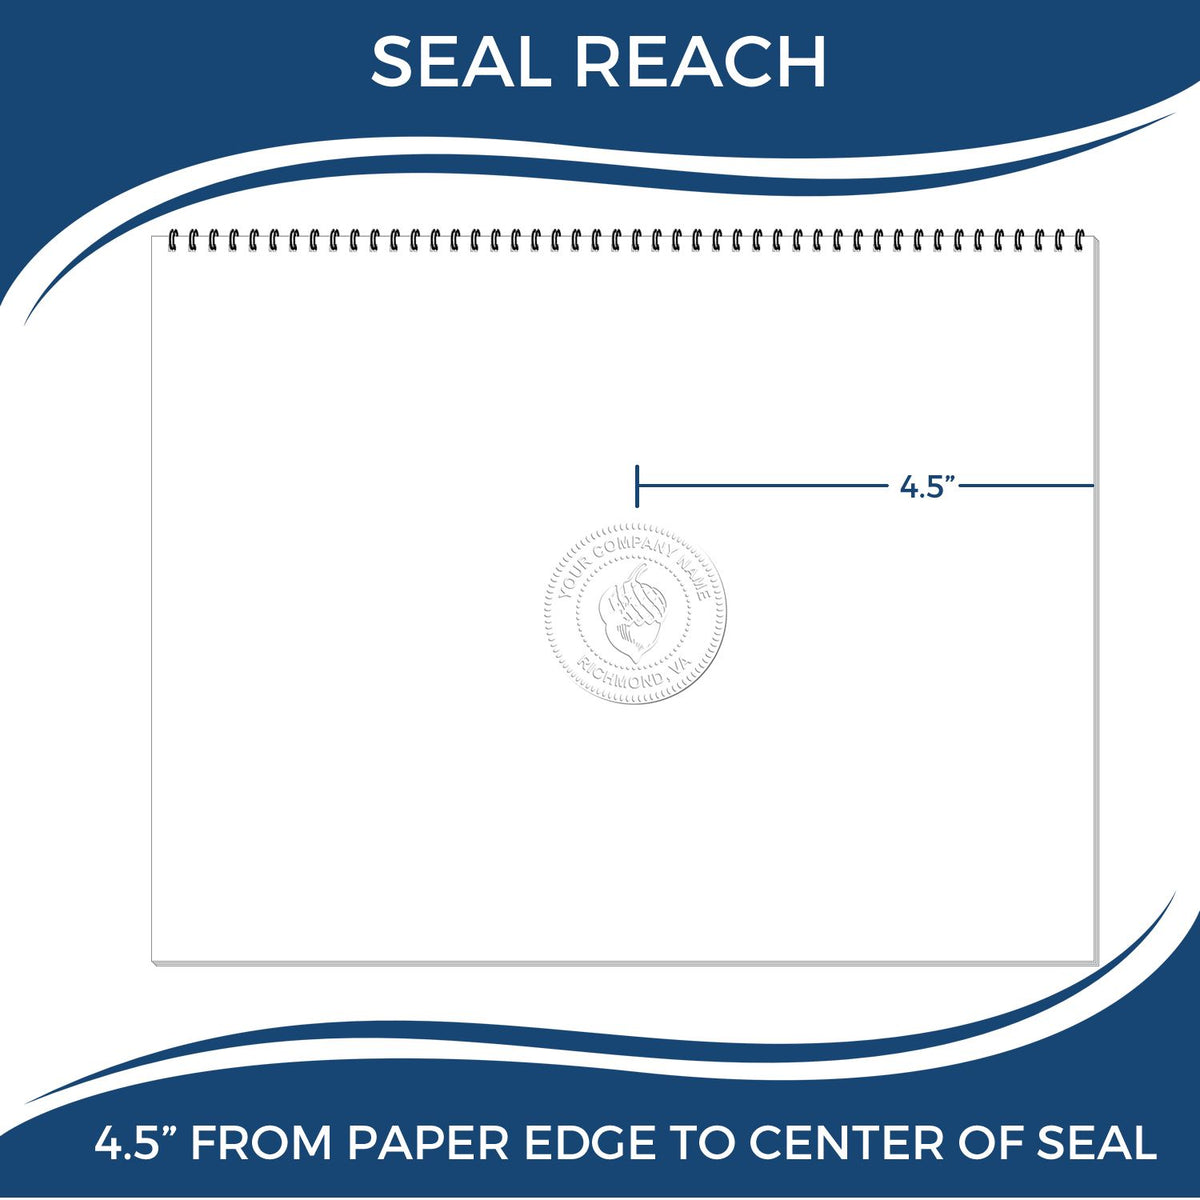 An infographic showing the seal reach which is represented by a ruler and a miniature seal image of the Extended Long Reach District of Columbia Architect Seal Embosser